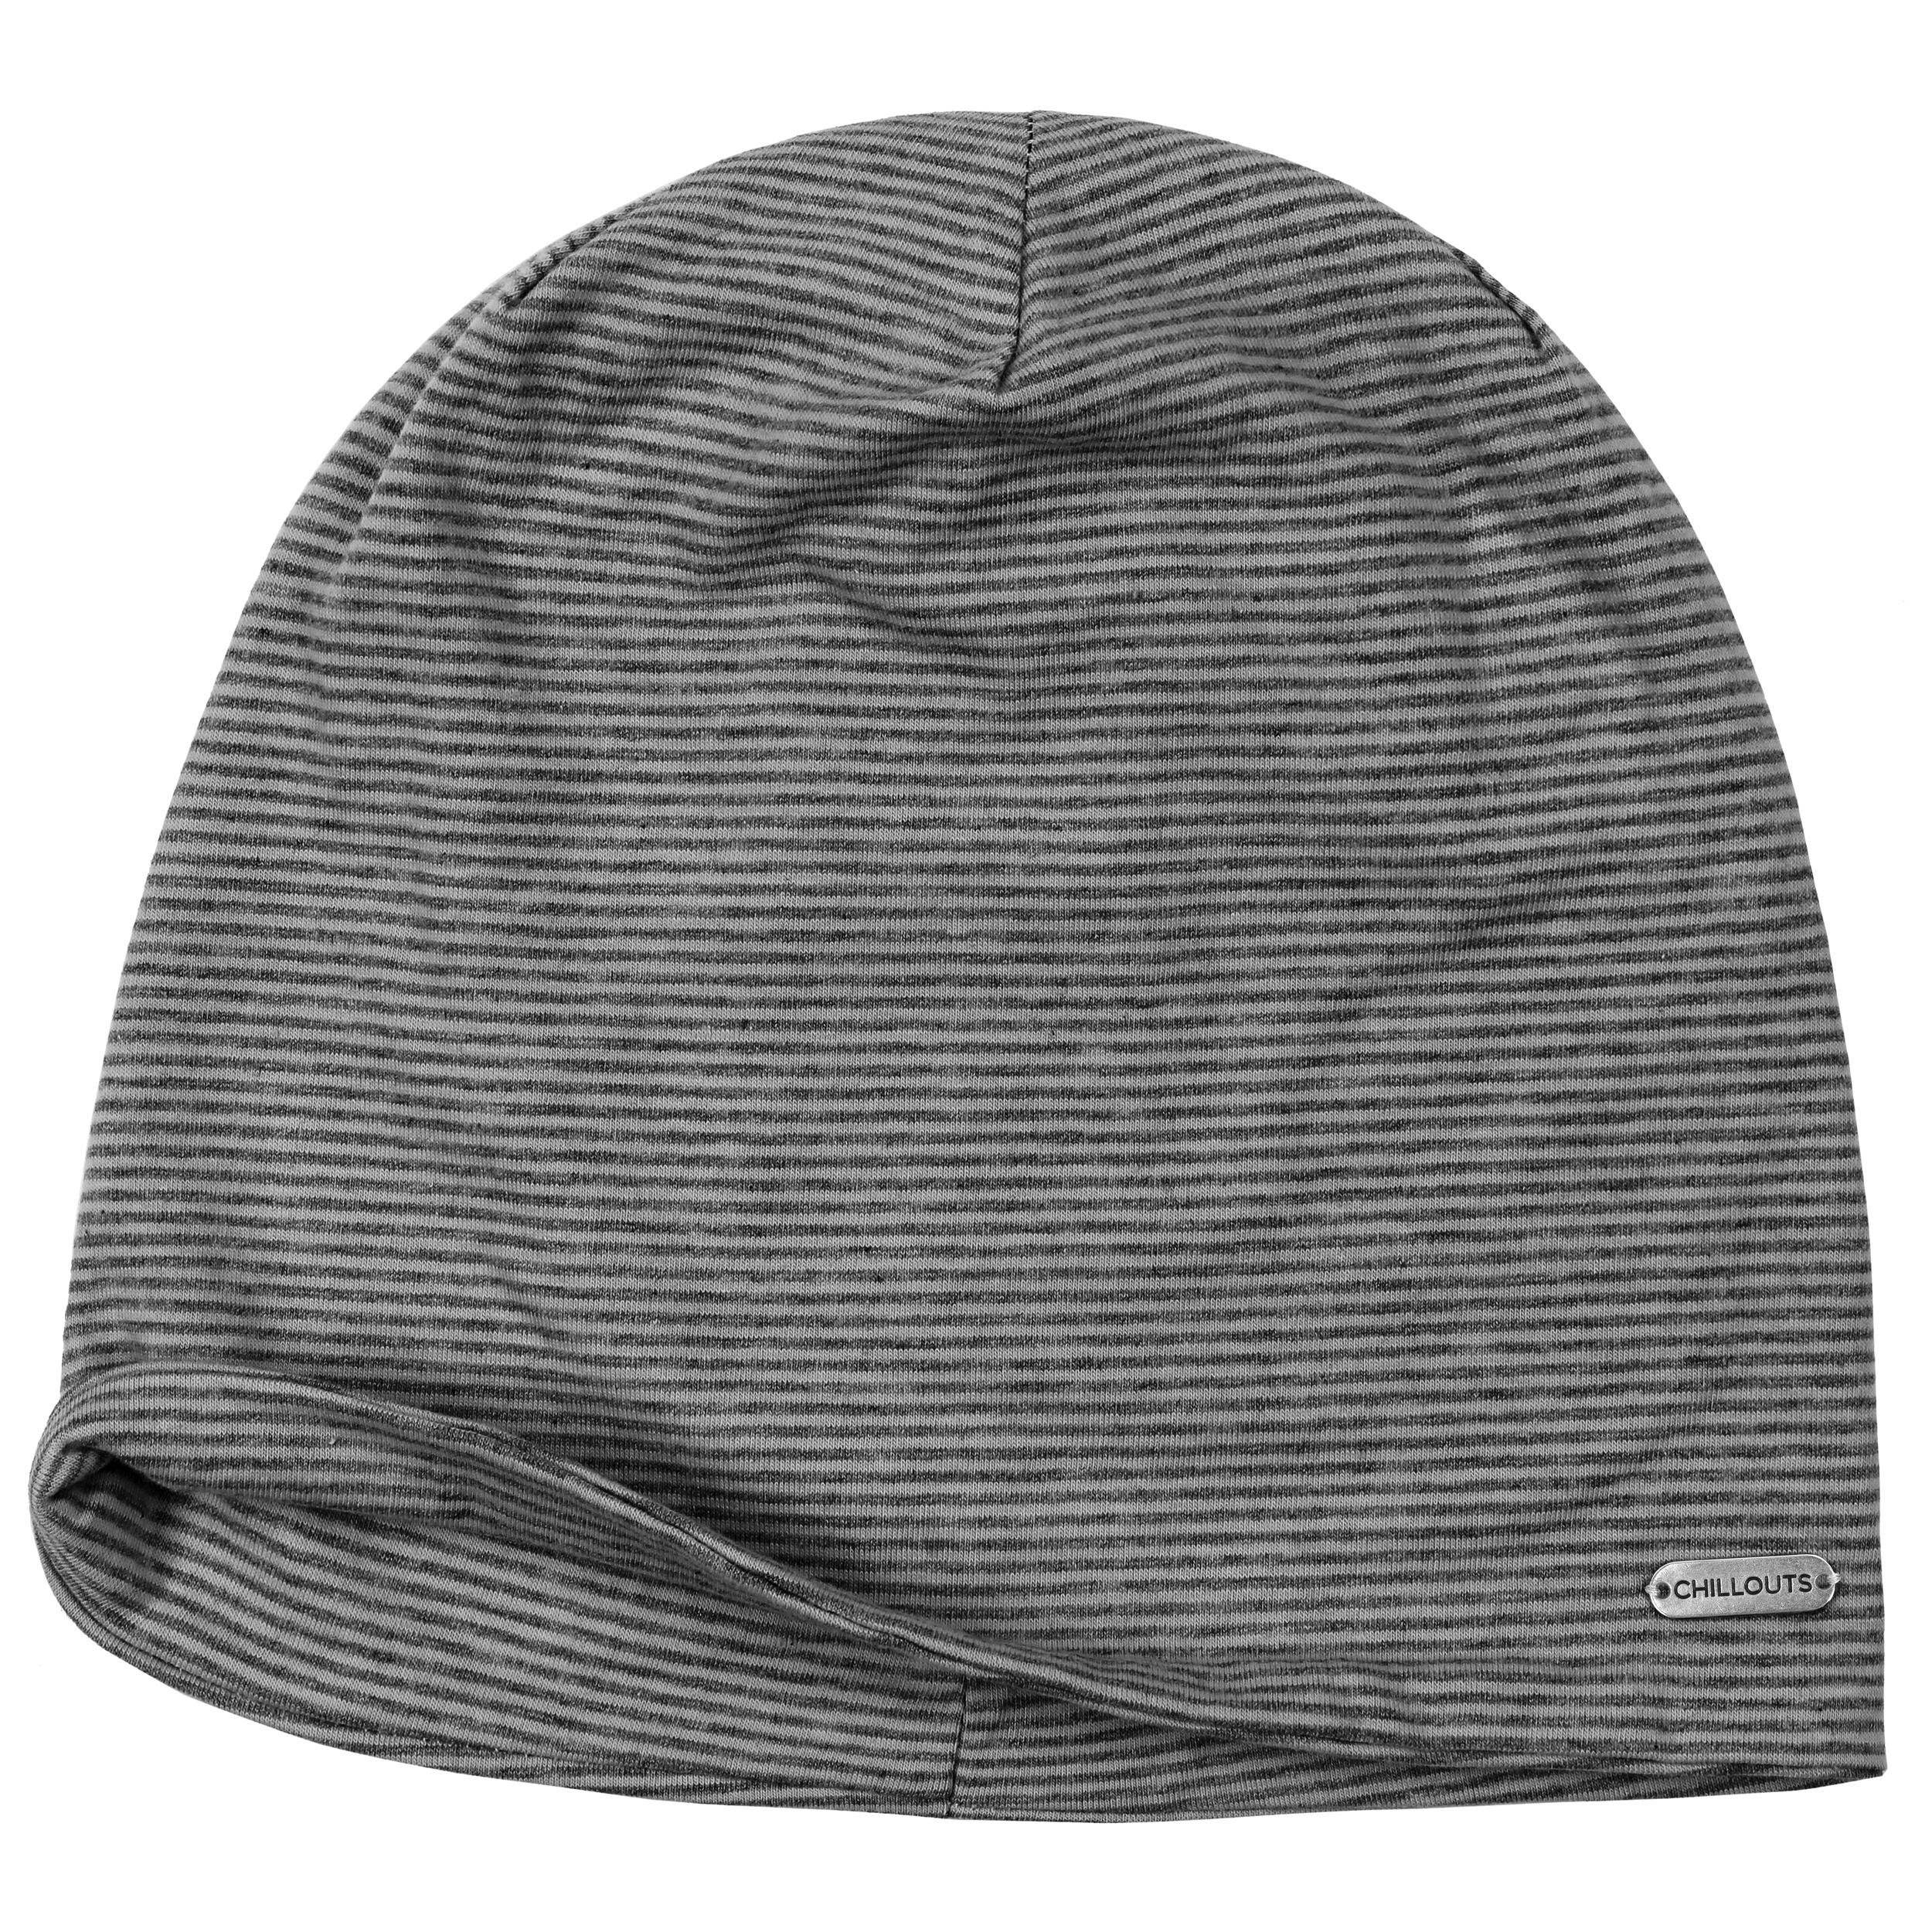 € by Chillouts 24,95 Beanie - Pittsburgh Oversize